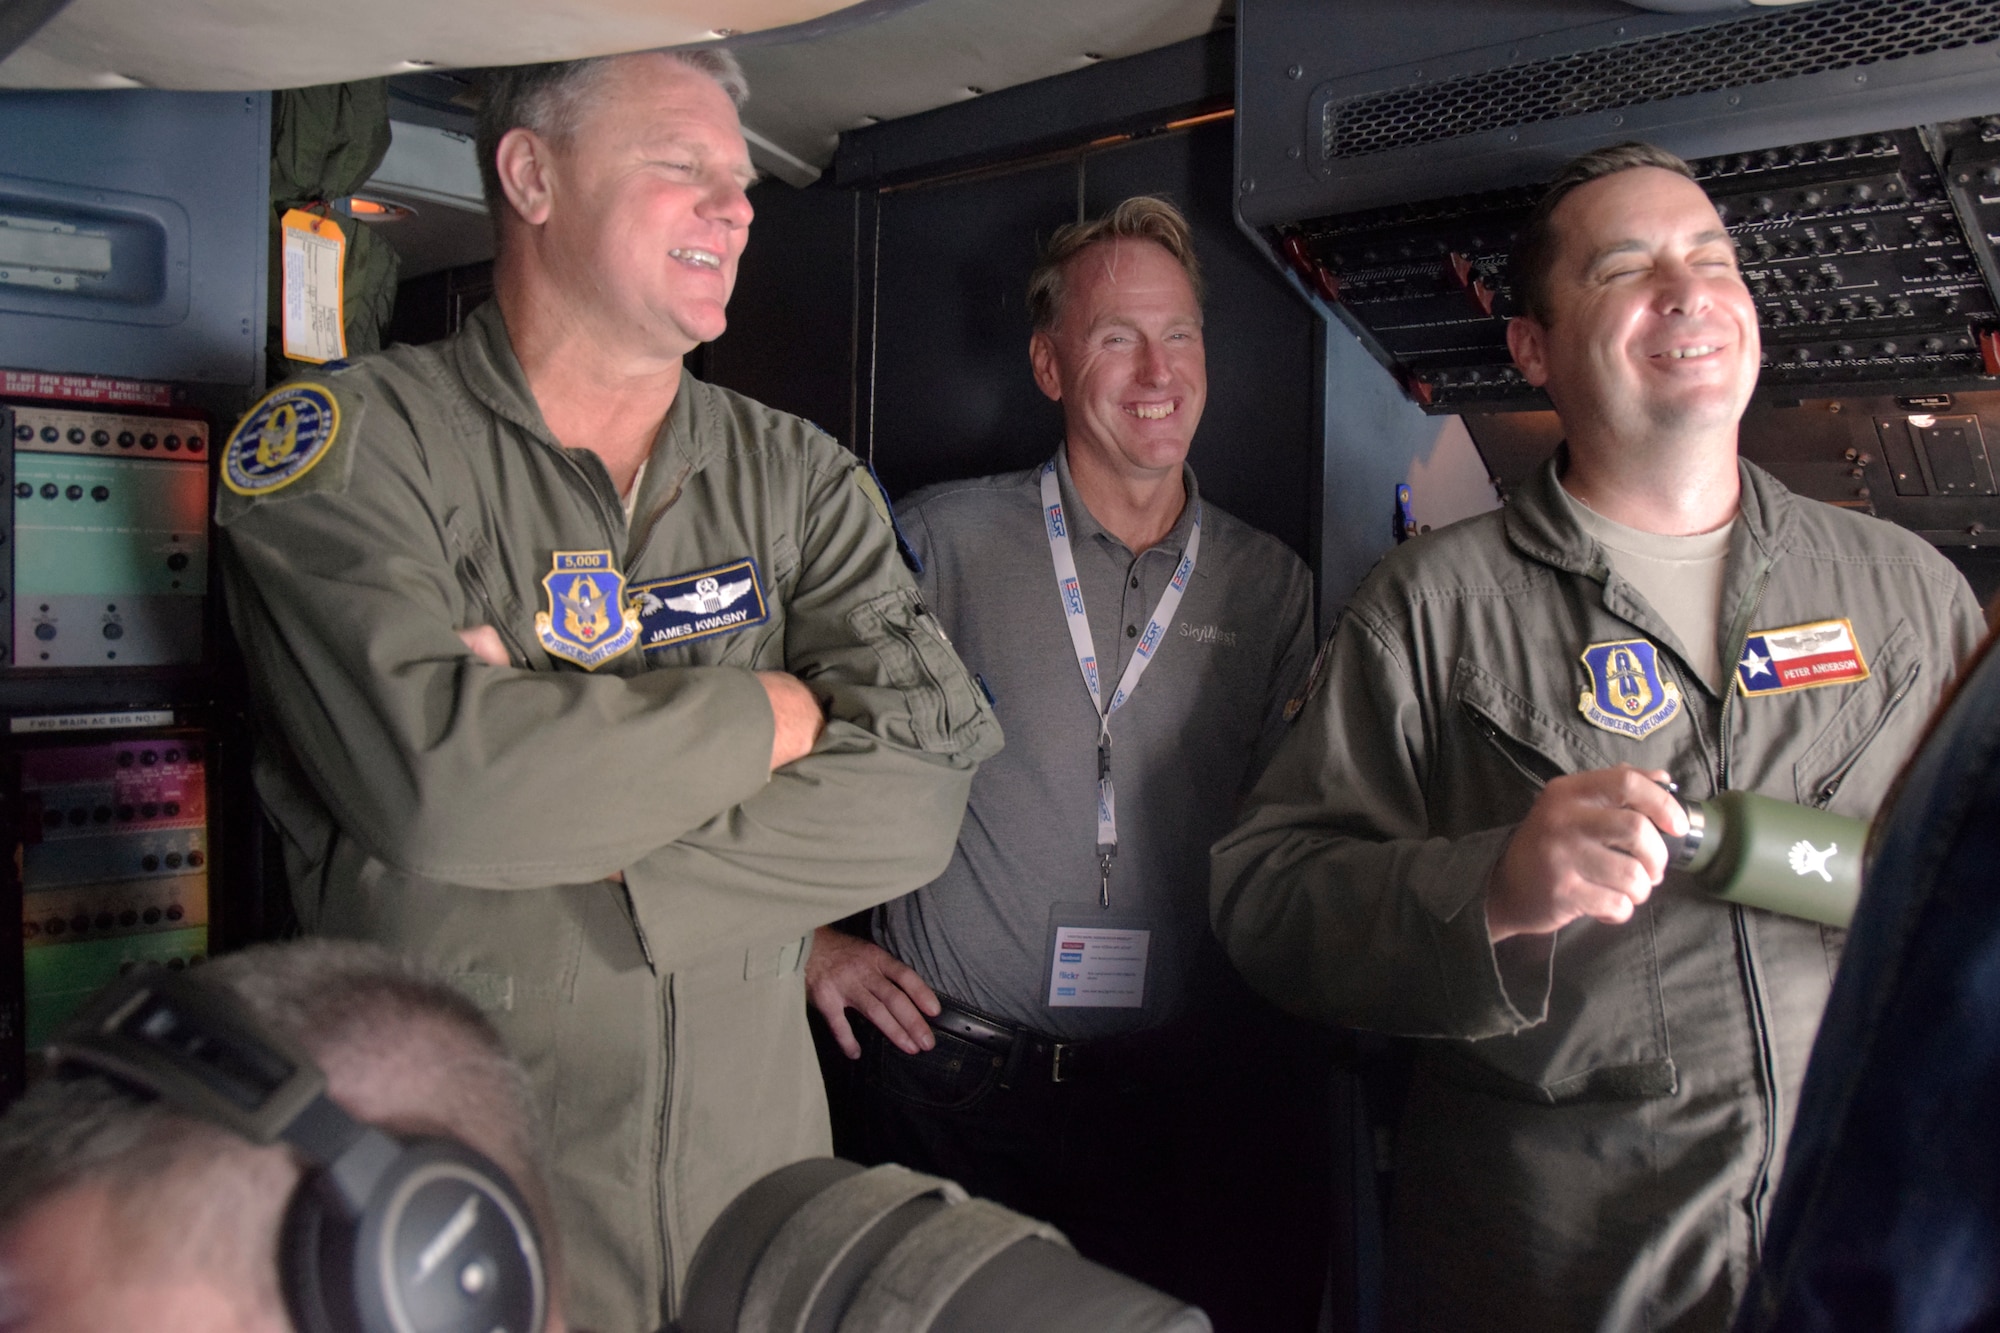 U.S. Air Force Lt. Col. James Kwasny, Air Force Reserve Command Safety Risk Management manager and Capt. Peter Anderson, 68th Airlift Squadron pilot, speak with Mike Reenders, SkyWest Airlines captain, aboard a C-5M Super Galaxy aircraft during an Operation Boss Lift flight from Joint Base San Antonio-Lackland, Texas, Aug. 4, 2018. The event, a combined effort of the Employer Support of the Guard and Reserve program and the 433rd Airlift Wing, promotes cooperation and understanding between Reserve Component Service members and their civilian employers. (U.S. Air Force photo by Staff Sgt. Lauren M. Snyder)